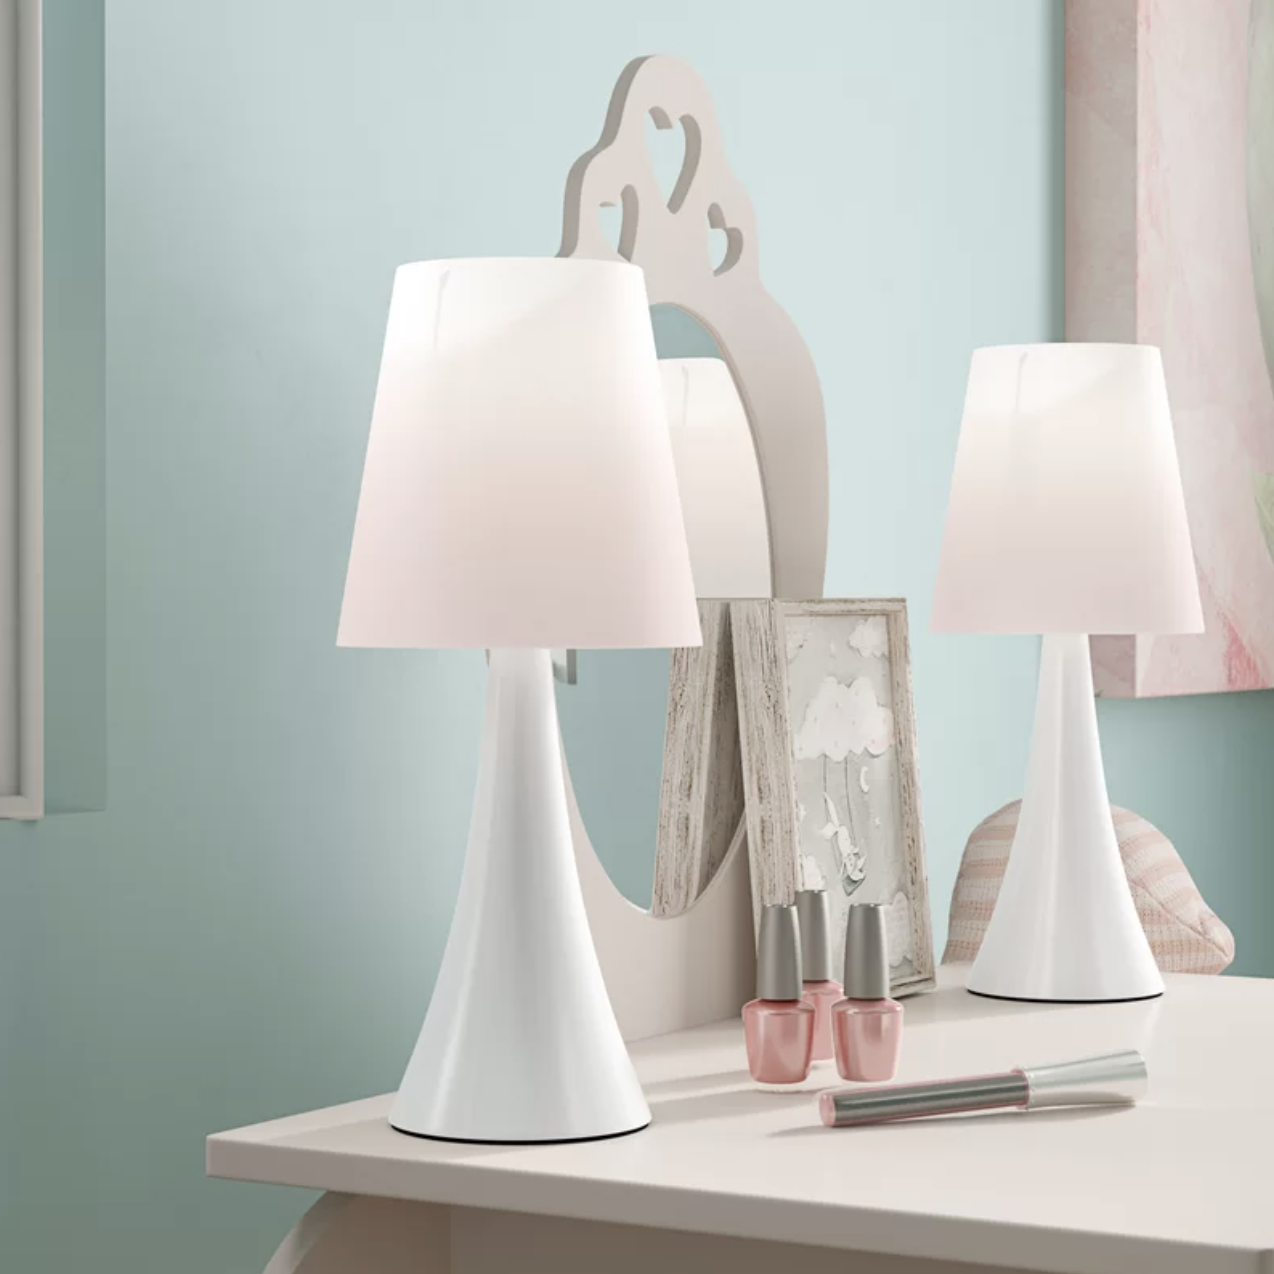 a pair of slim lamps with matching shades on a vanity